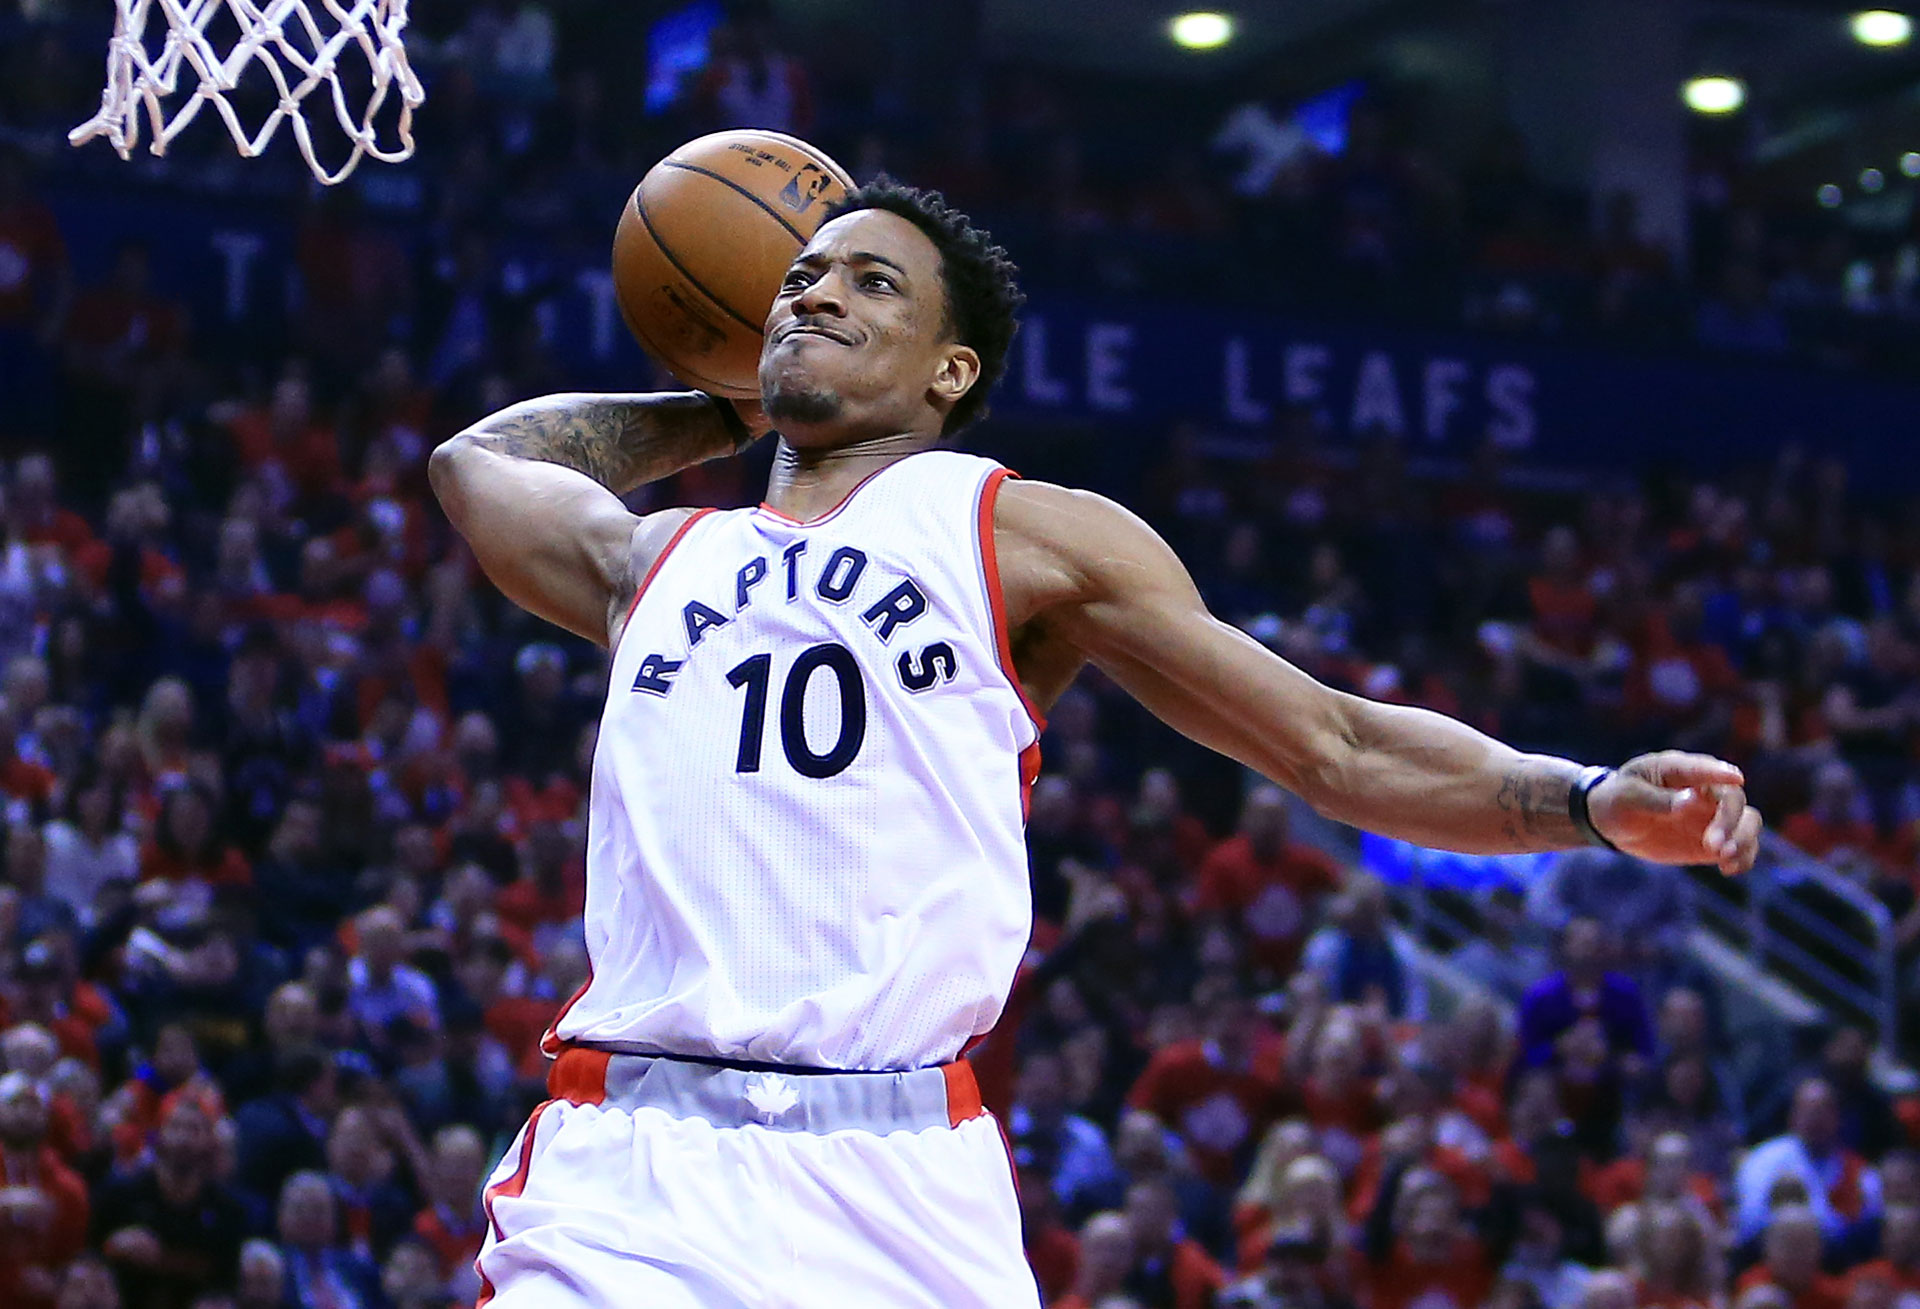 DeMar DeRozan #10 of the Toronto Raptors dunks the ball in the first half of Game Five of the Eastern Conference Quarterfinals